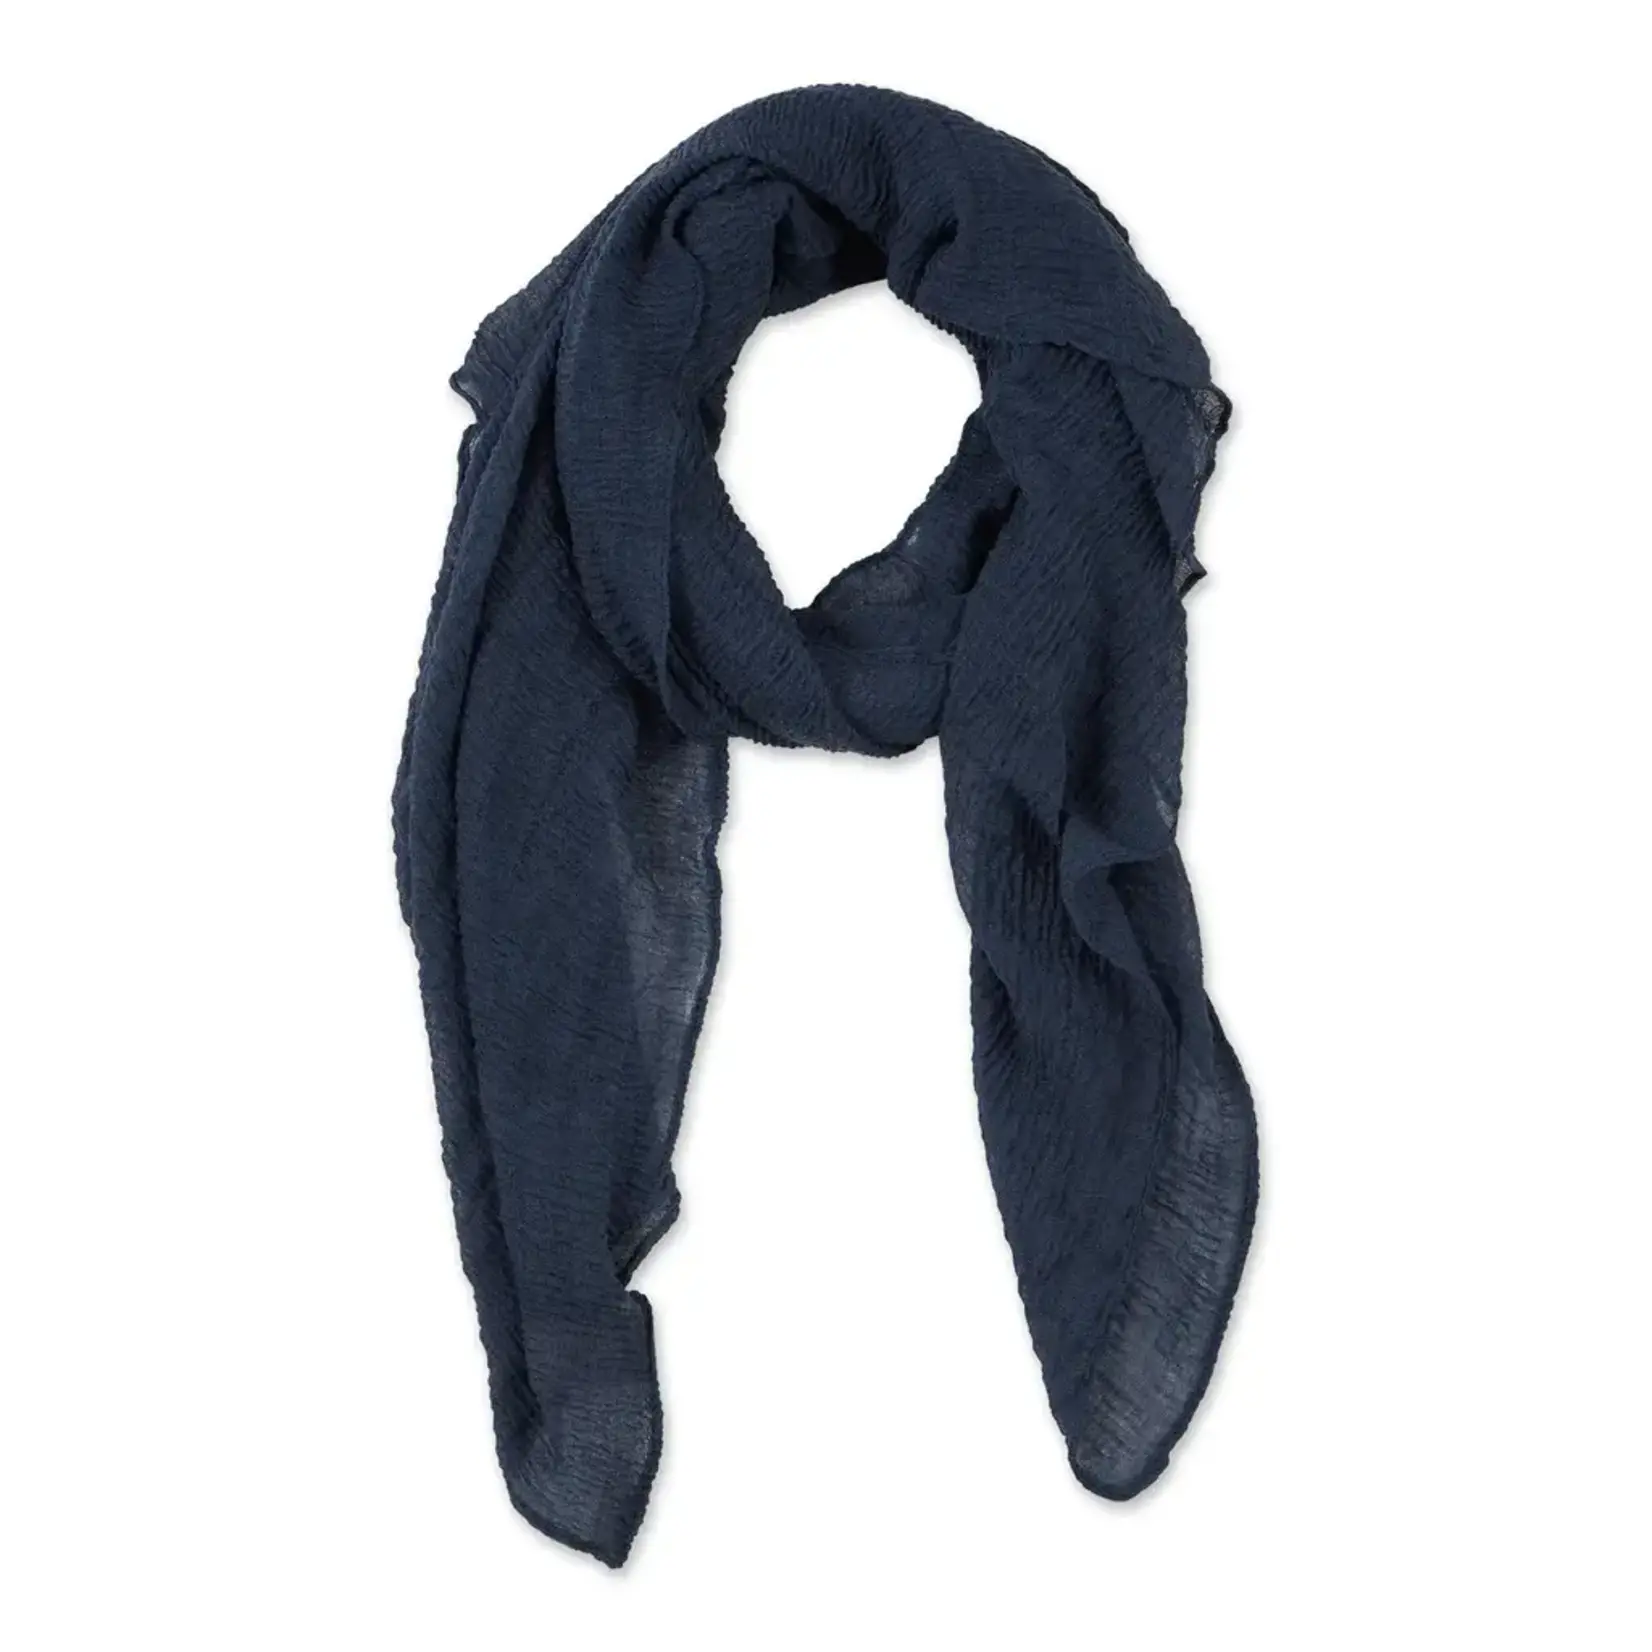 INSECT SHIELD SCARF - NAVY